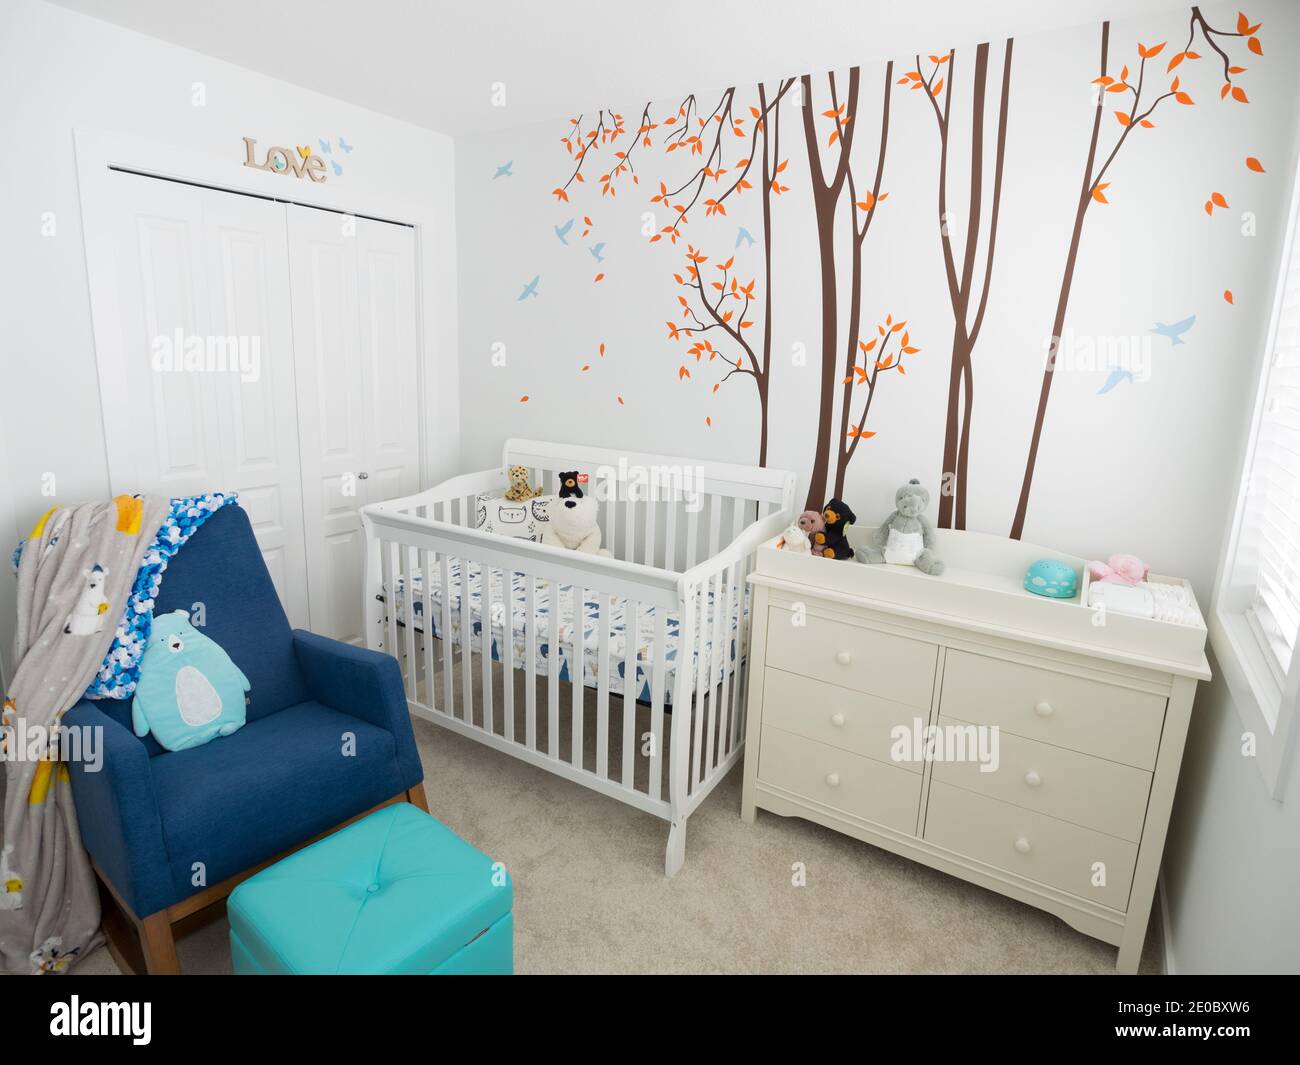 A decorated modern baby nursery bedroom with a crib, dresser, diaper change table, rocking chair, and no people. Stock Photo